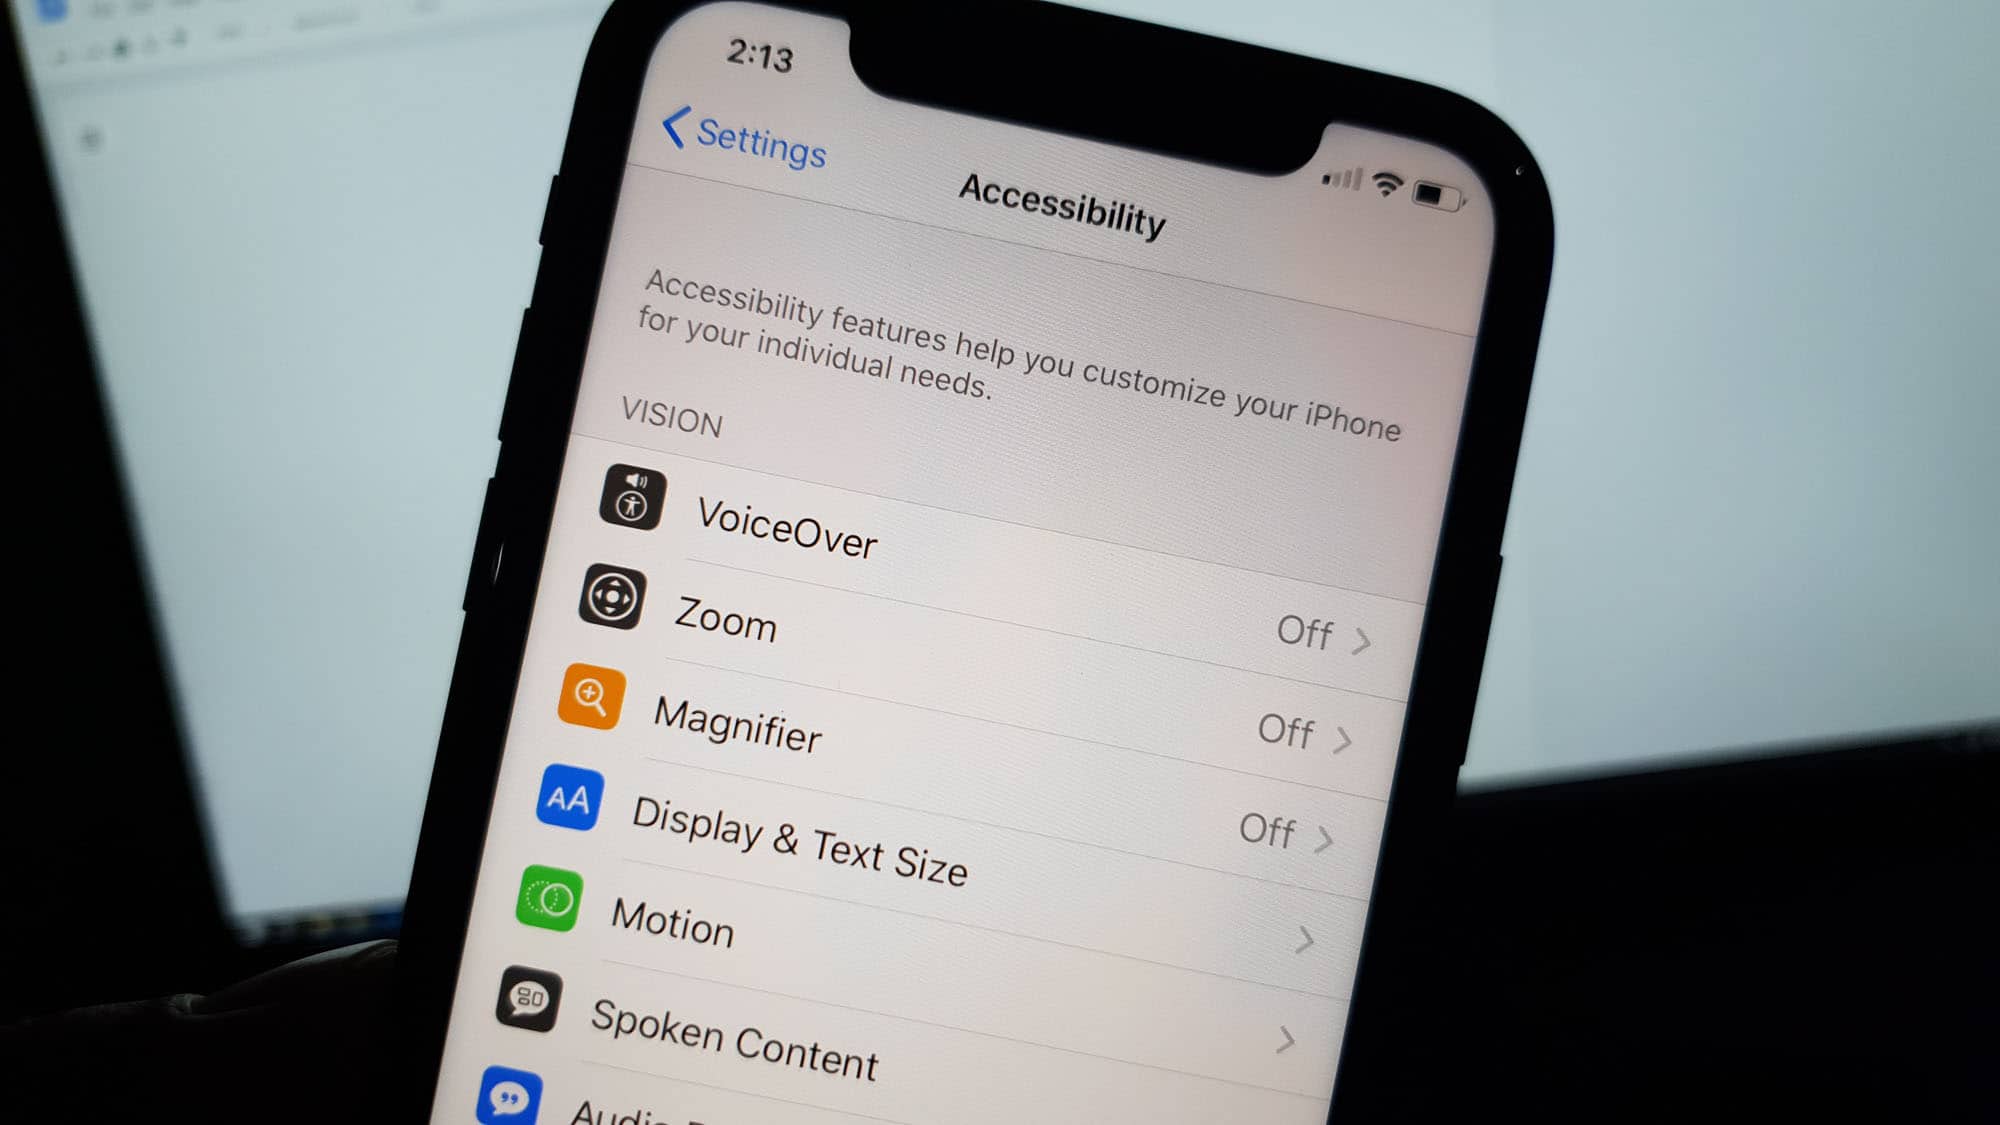 Fix delayed touchscreen response on iPhone 11 after iOS 13 update